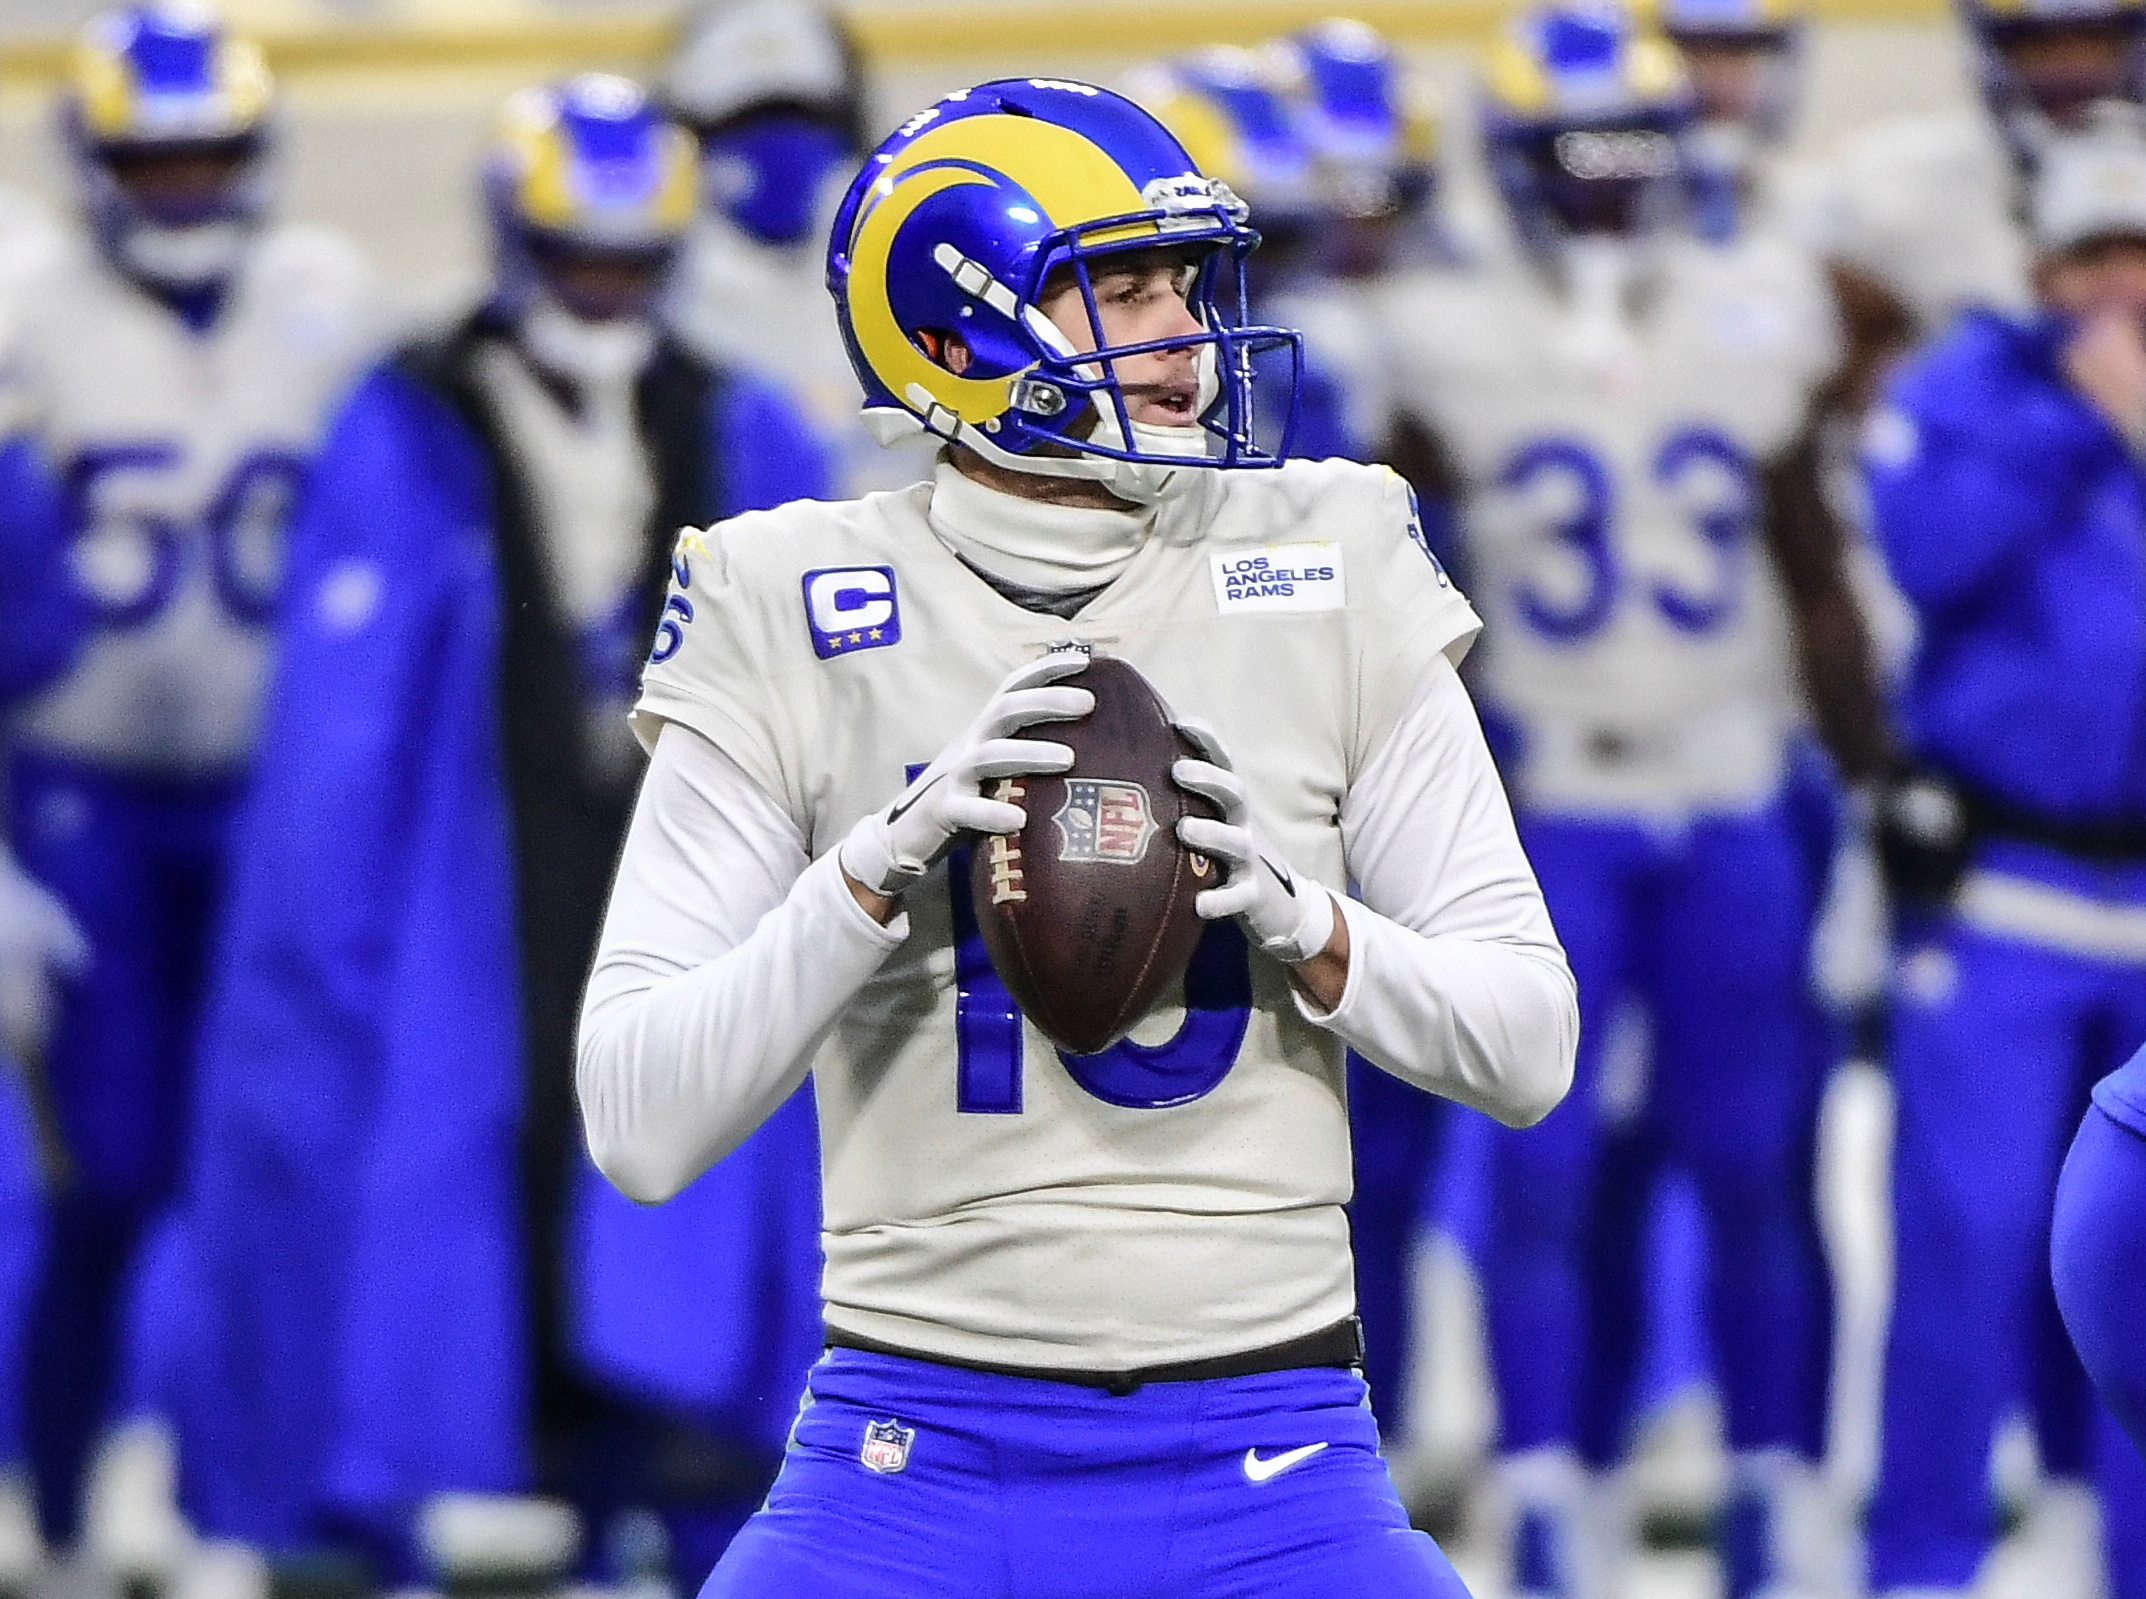 NFLRams trade Goff and draft picks for Stafford reports Reuters